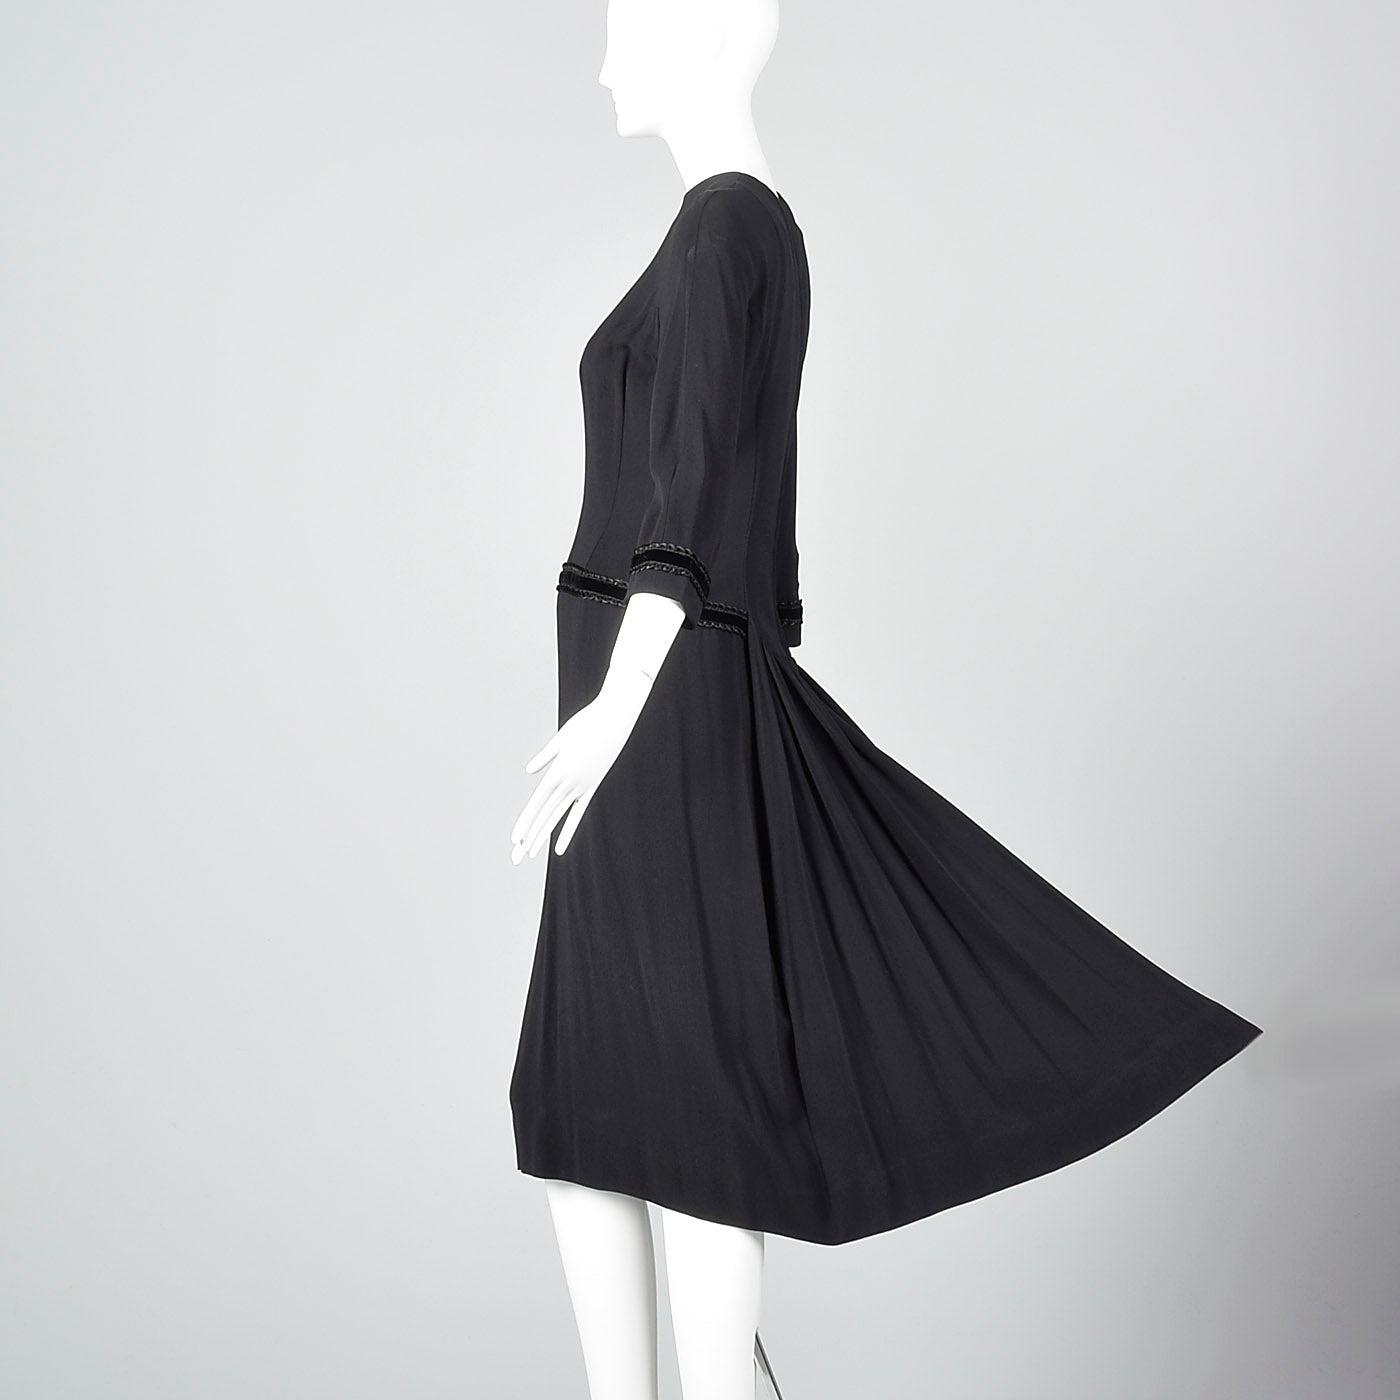 1950s Black Dress with Drop Waist and Bustle Train